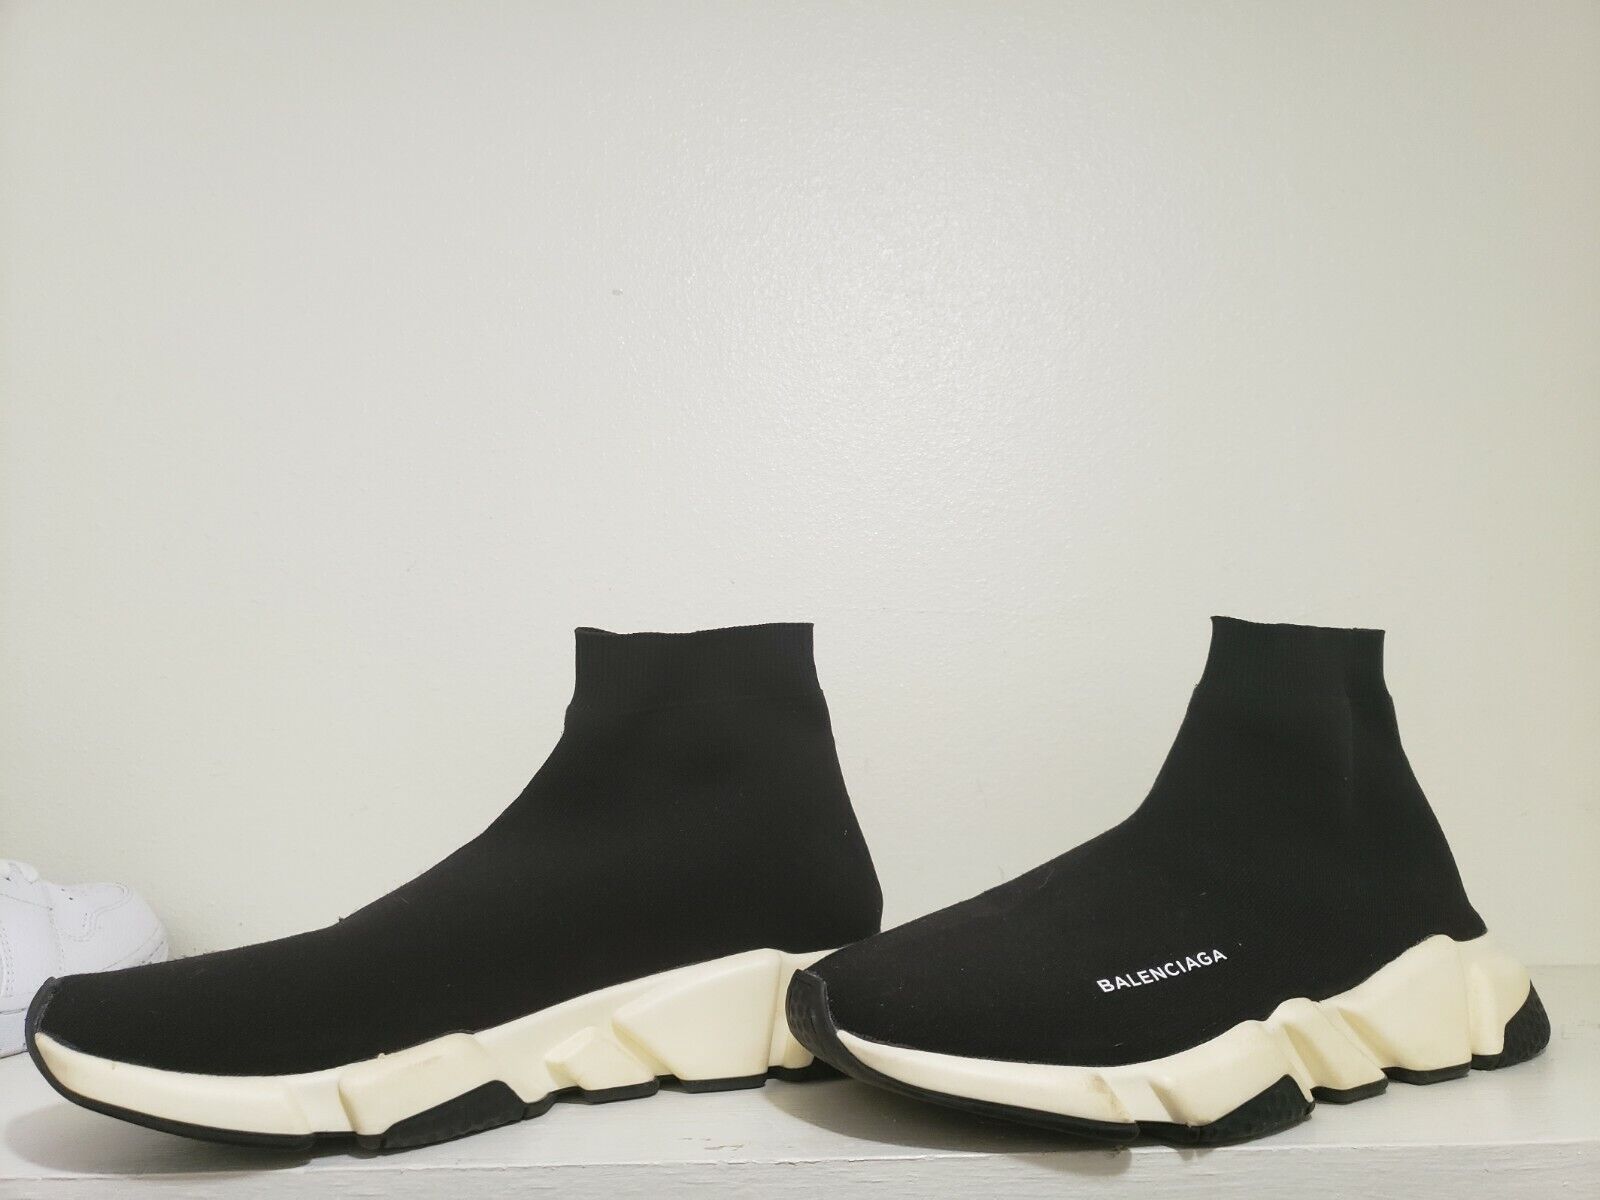 Balenciaga Speed Trainers Black And White - Size 11. Great Condition/Hardly Worn